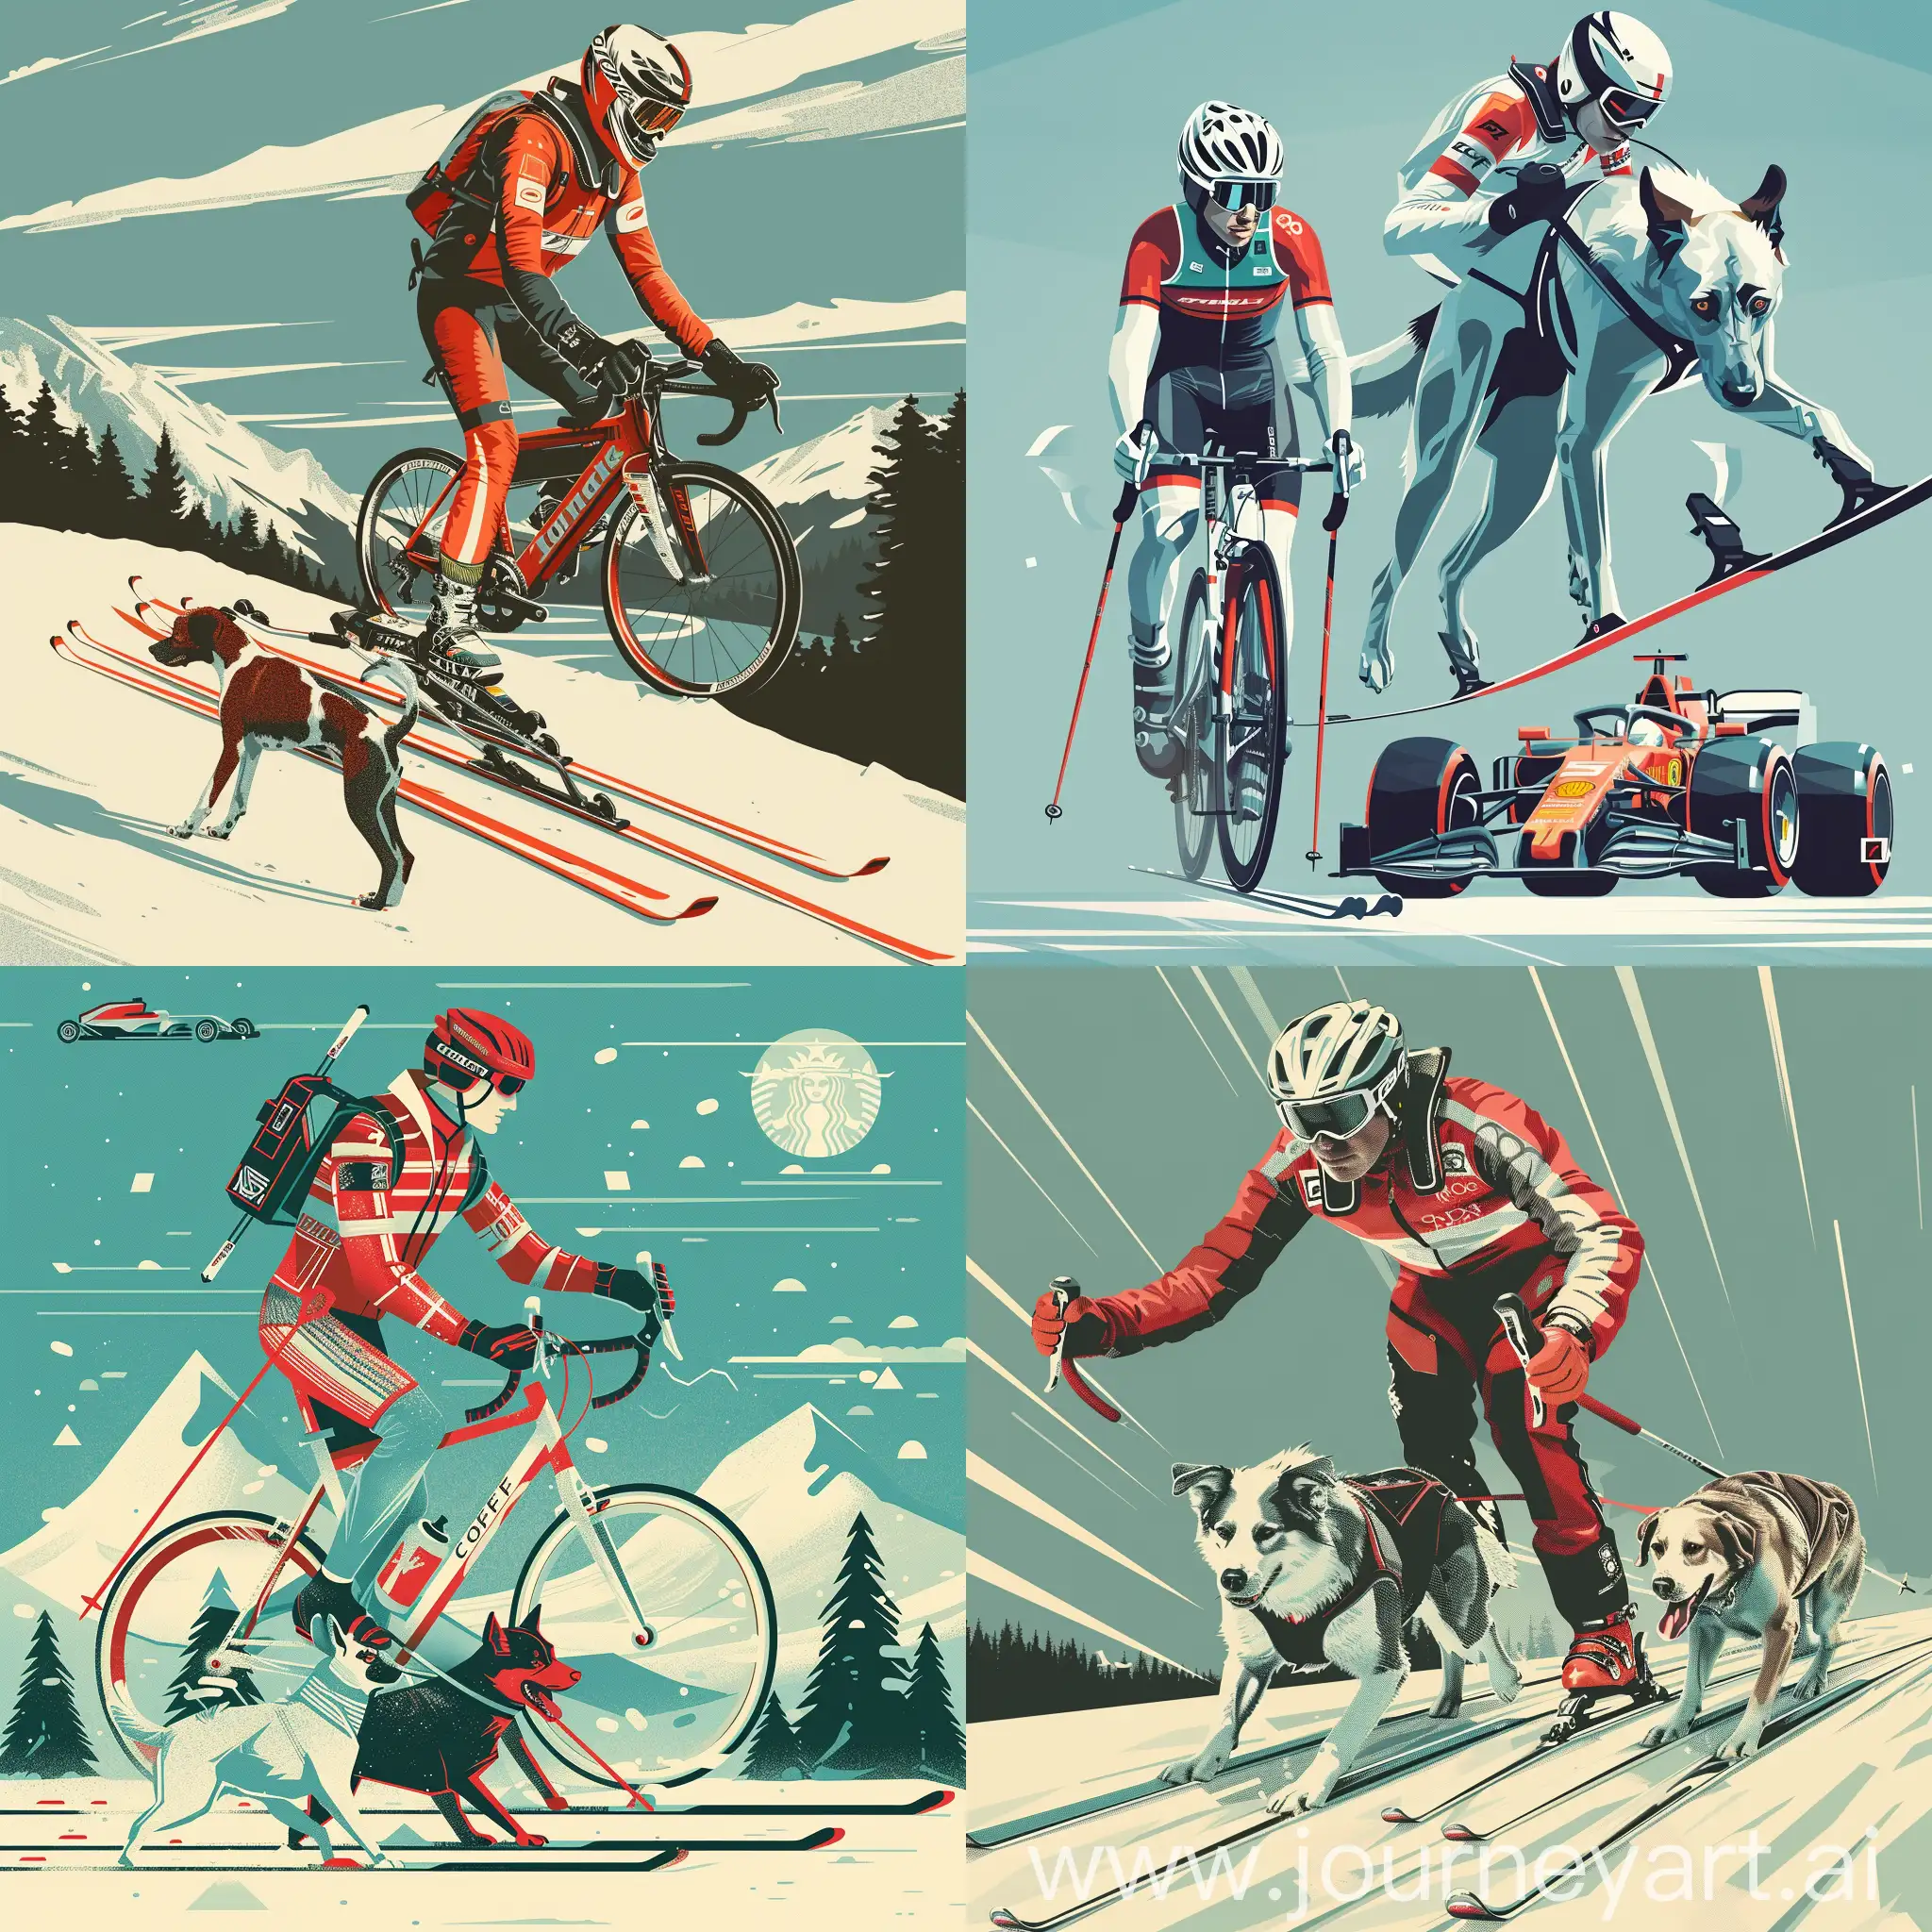 Multisport-Adventure-Cross-Country-Skiing-Espresso-Road-Cycling-Formula-1-Dogs-and-Technology